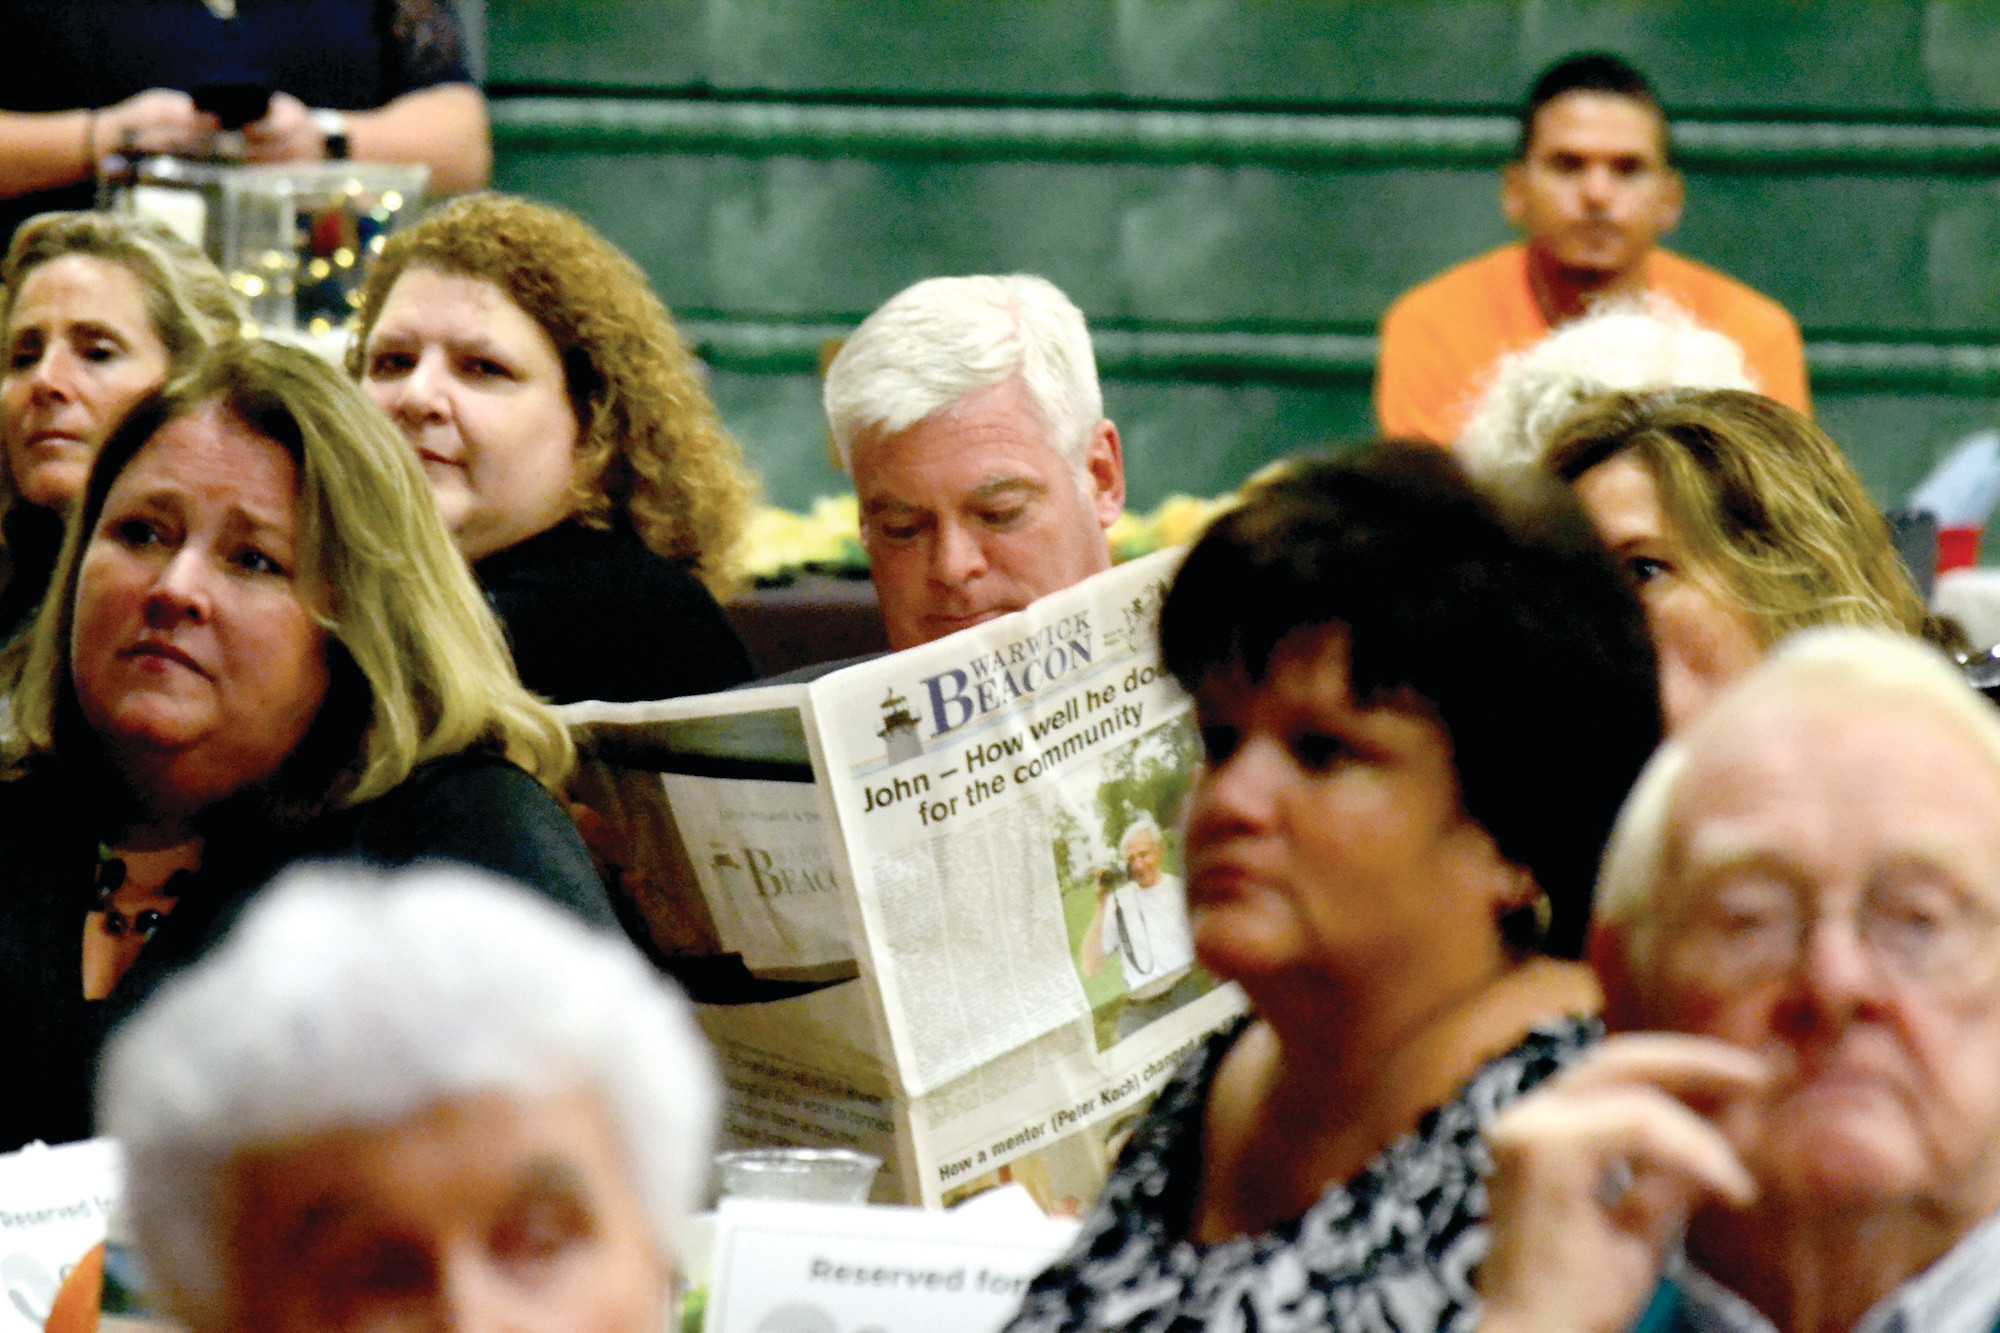 EXTRA EXTRA: Mayor Avedisian sits absorbed in the special edition of the Beacon that was produced especially for John Howell’s tribute event, held at Bishop Hendricken last Thursday evening.